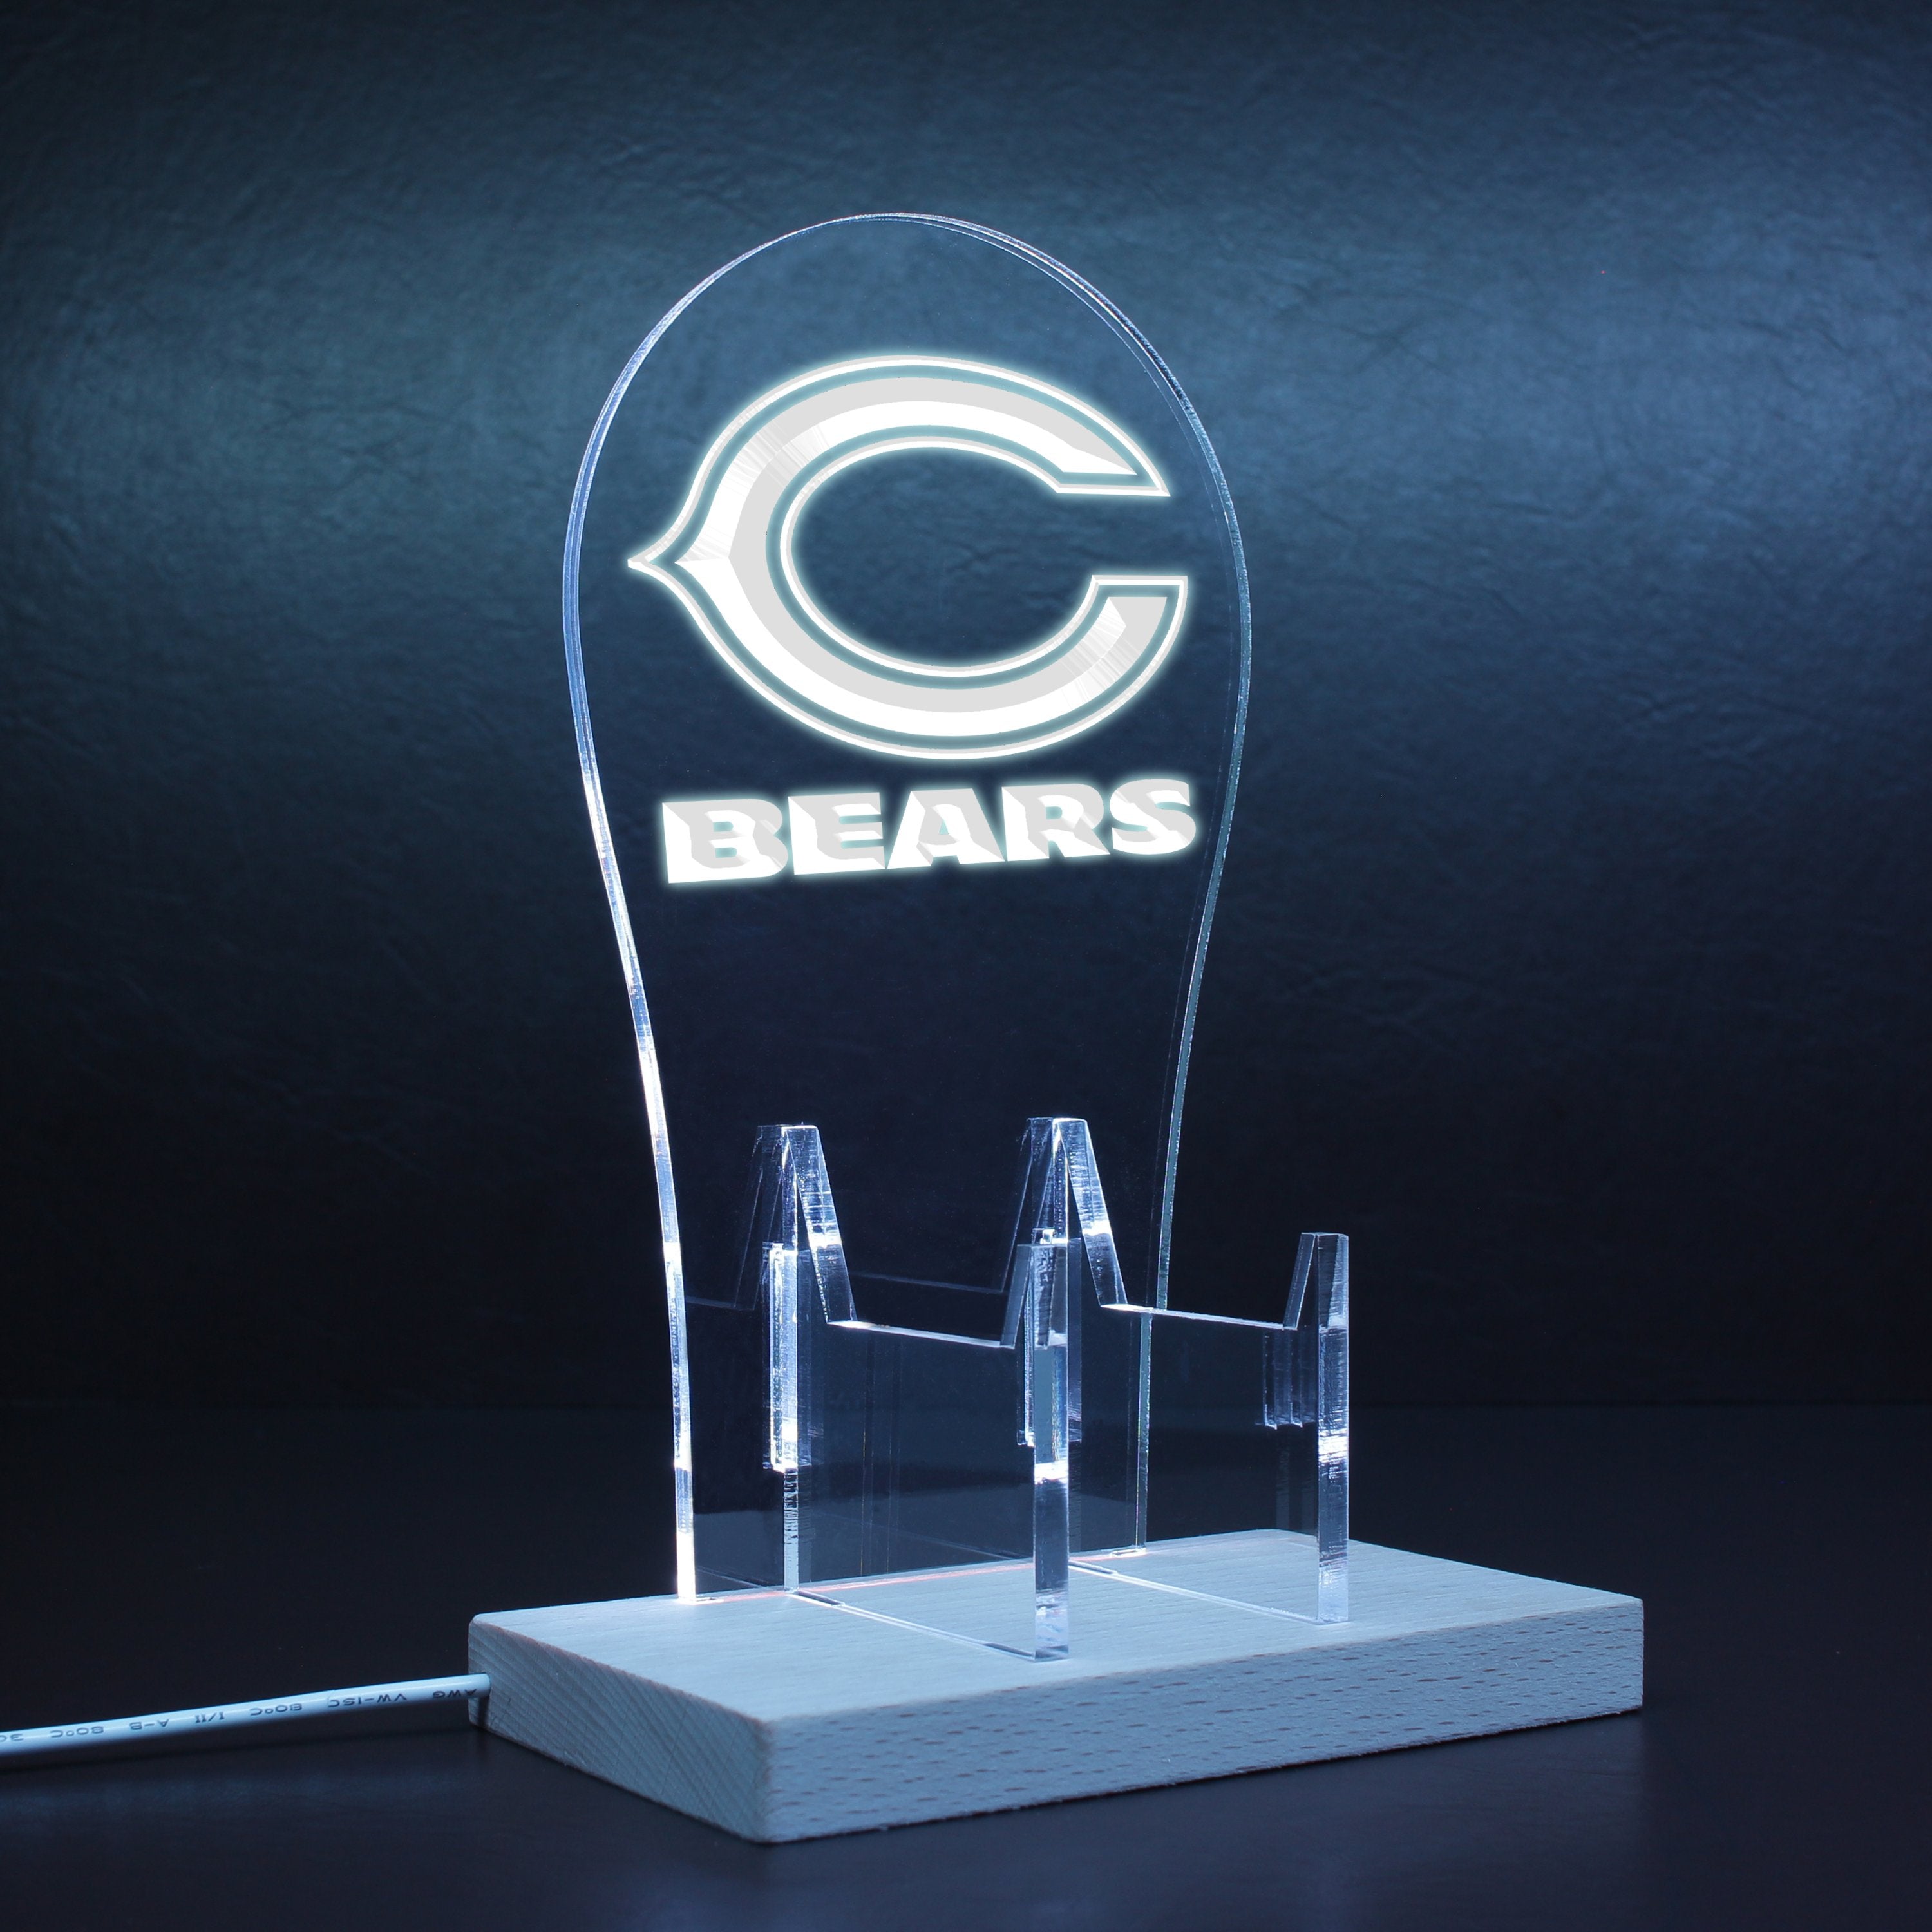 Chicago Bears Super Bowl LED Gaming Headset Controller Stand